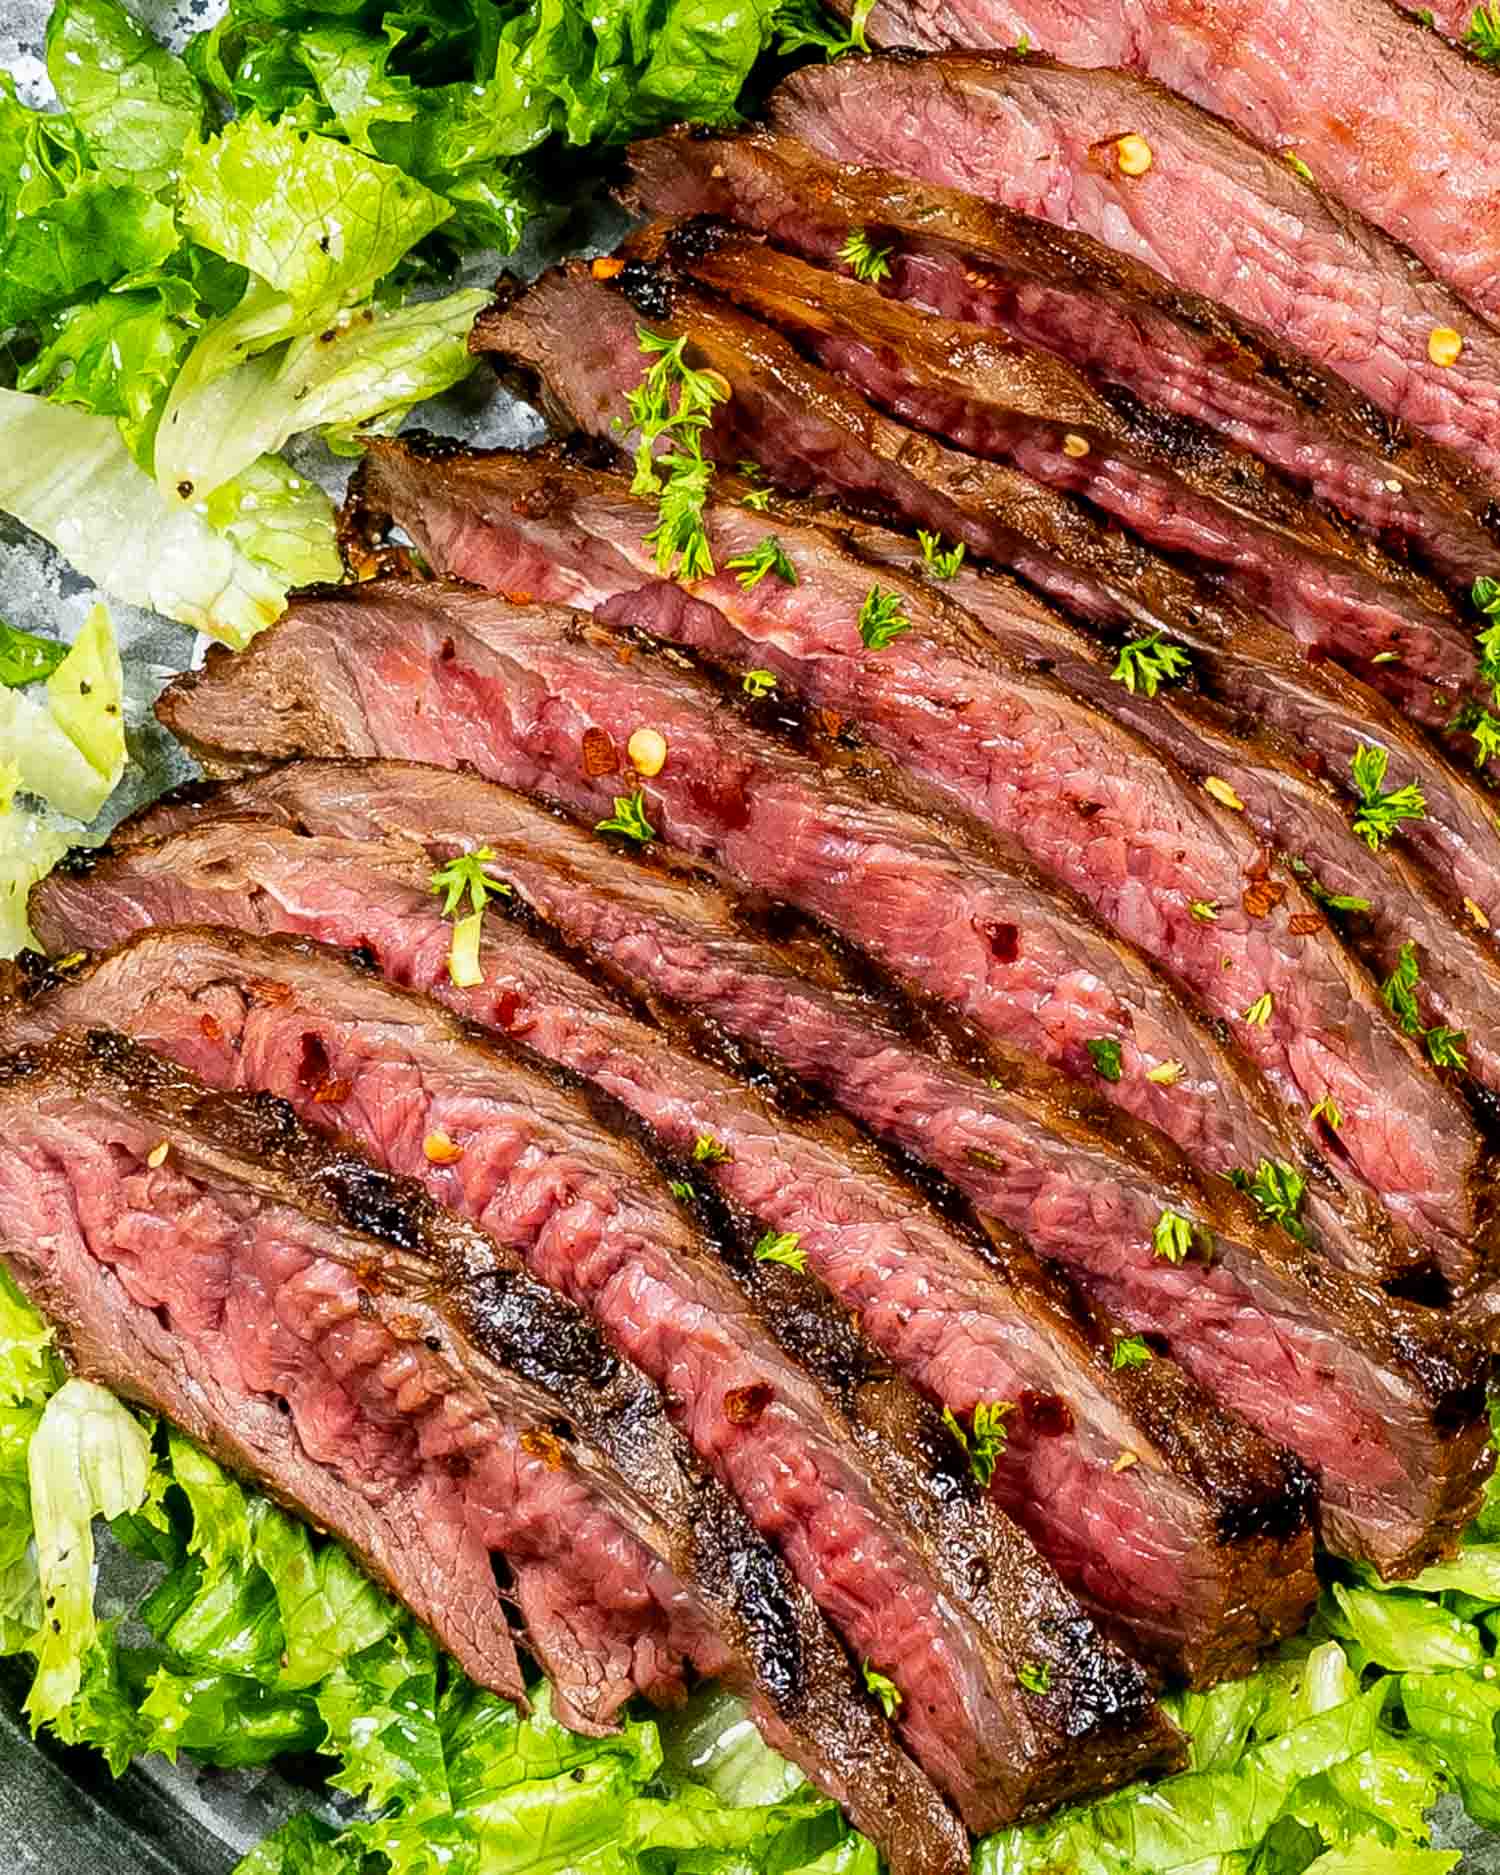 london broil all sliced up on a bed of lettuce.